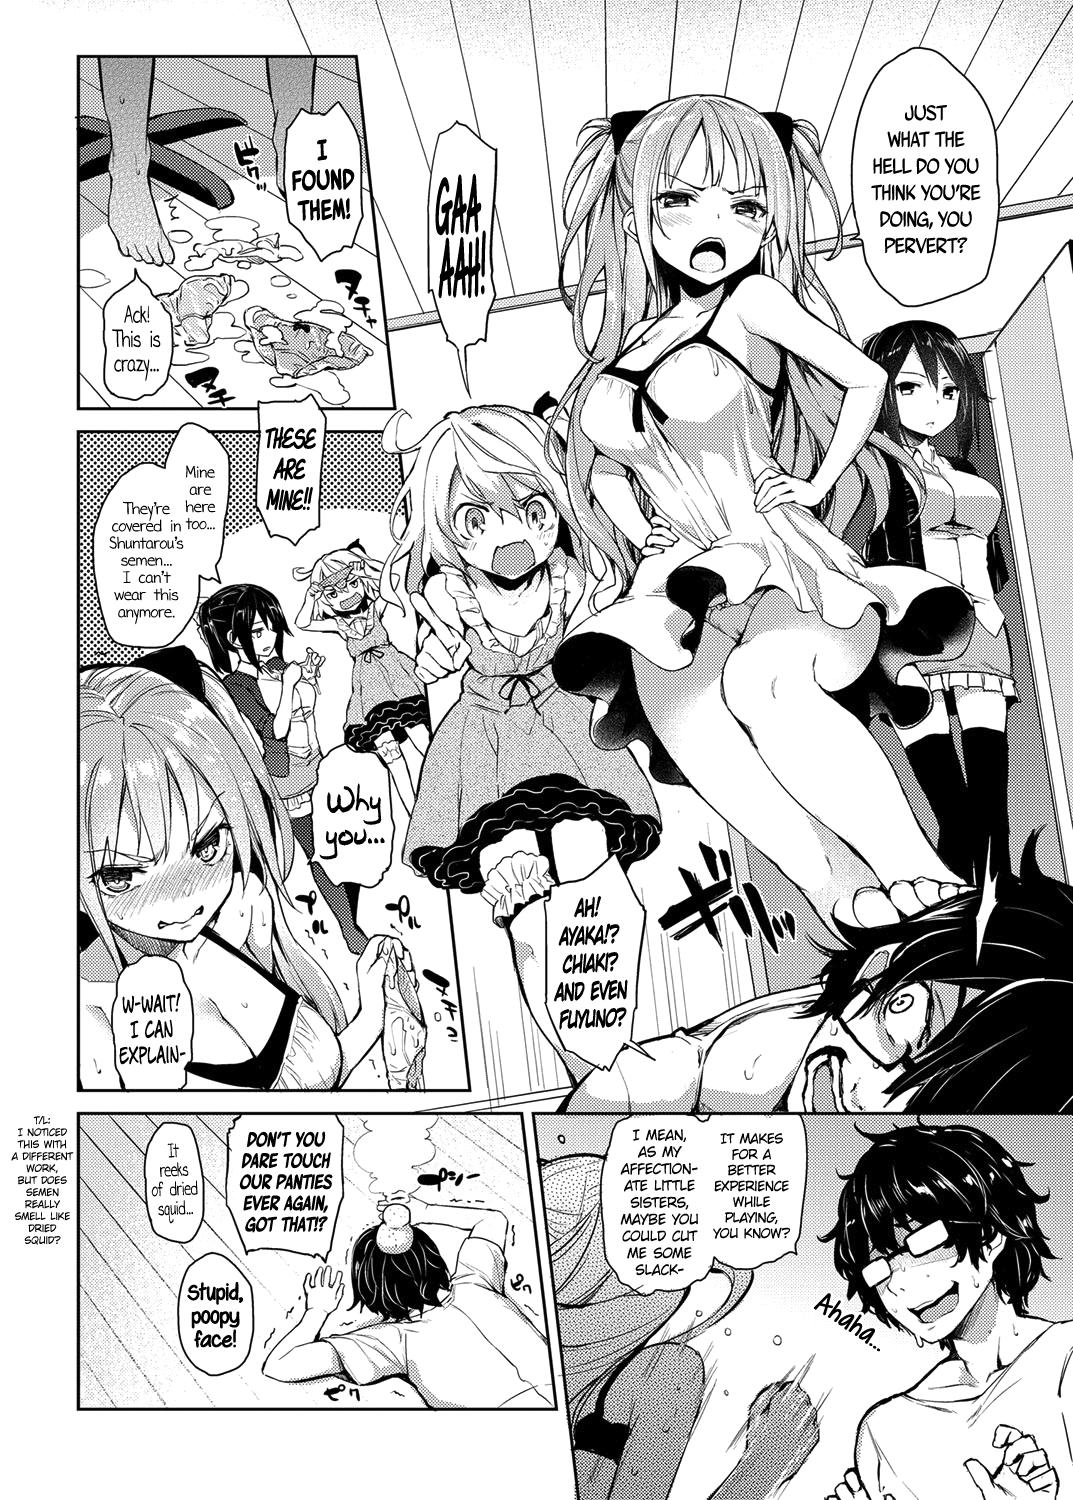 Argentina Ane Taiken Shuukan | The Older Sister Experience for a Week Raw - Page 2